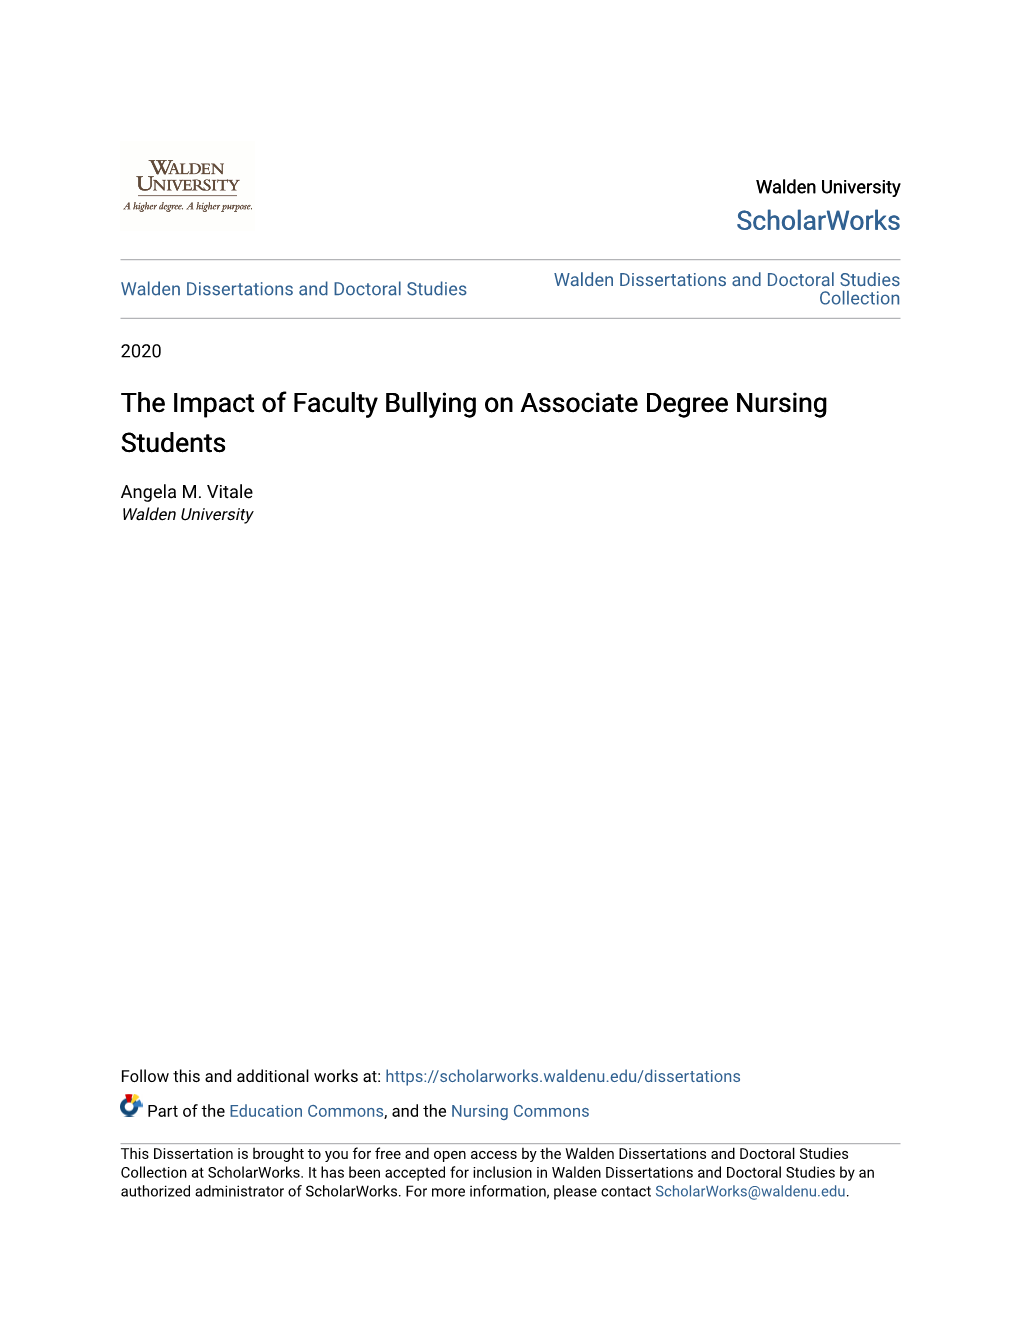 The Impact of Faculty Bullying on Associate Degree Nursing Students